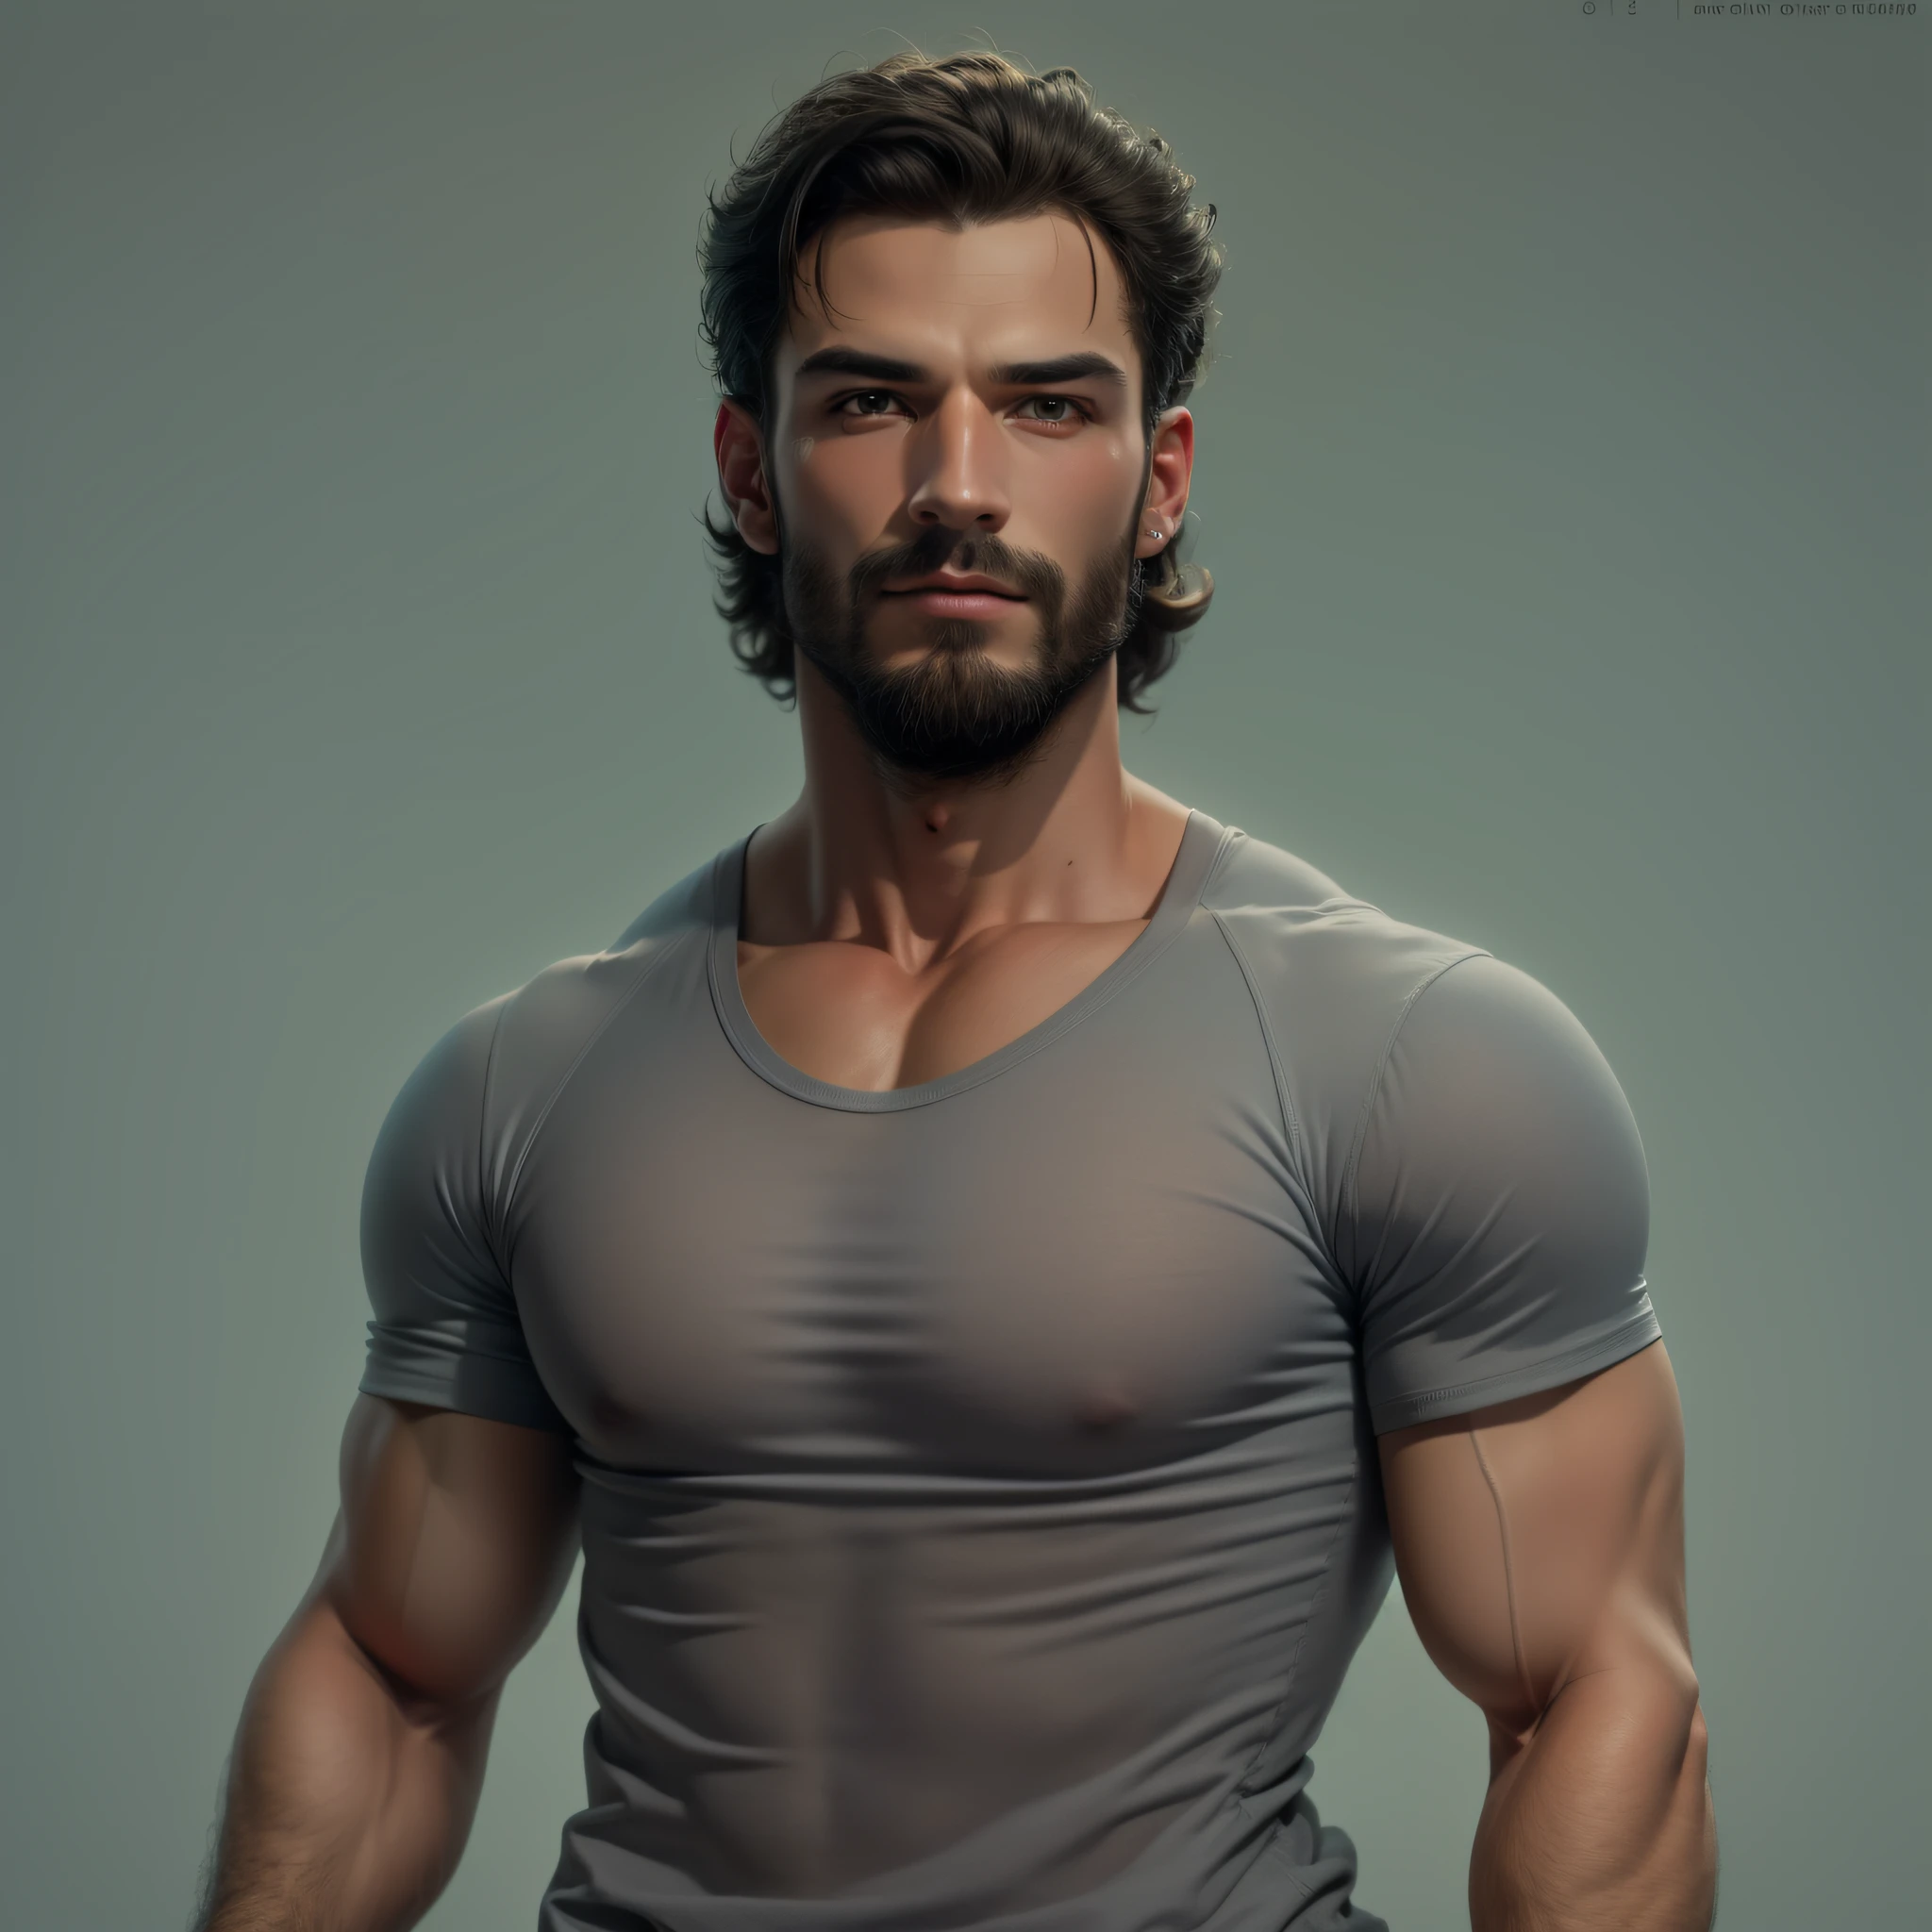 Realistic BUST photo of a very handsome man , with Latin features and light brown skin,  muscular body and broad, strong shoulders, wearing a tight black t-shirt,  he has curly hair shaved on the sides,  very short beard , piercing eyes. Very Masculine. pink photo background.